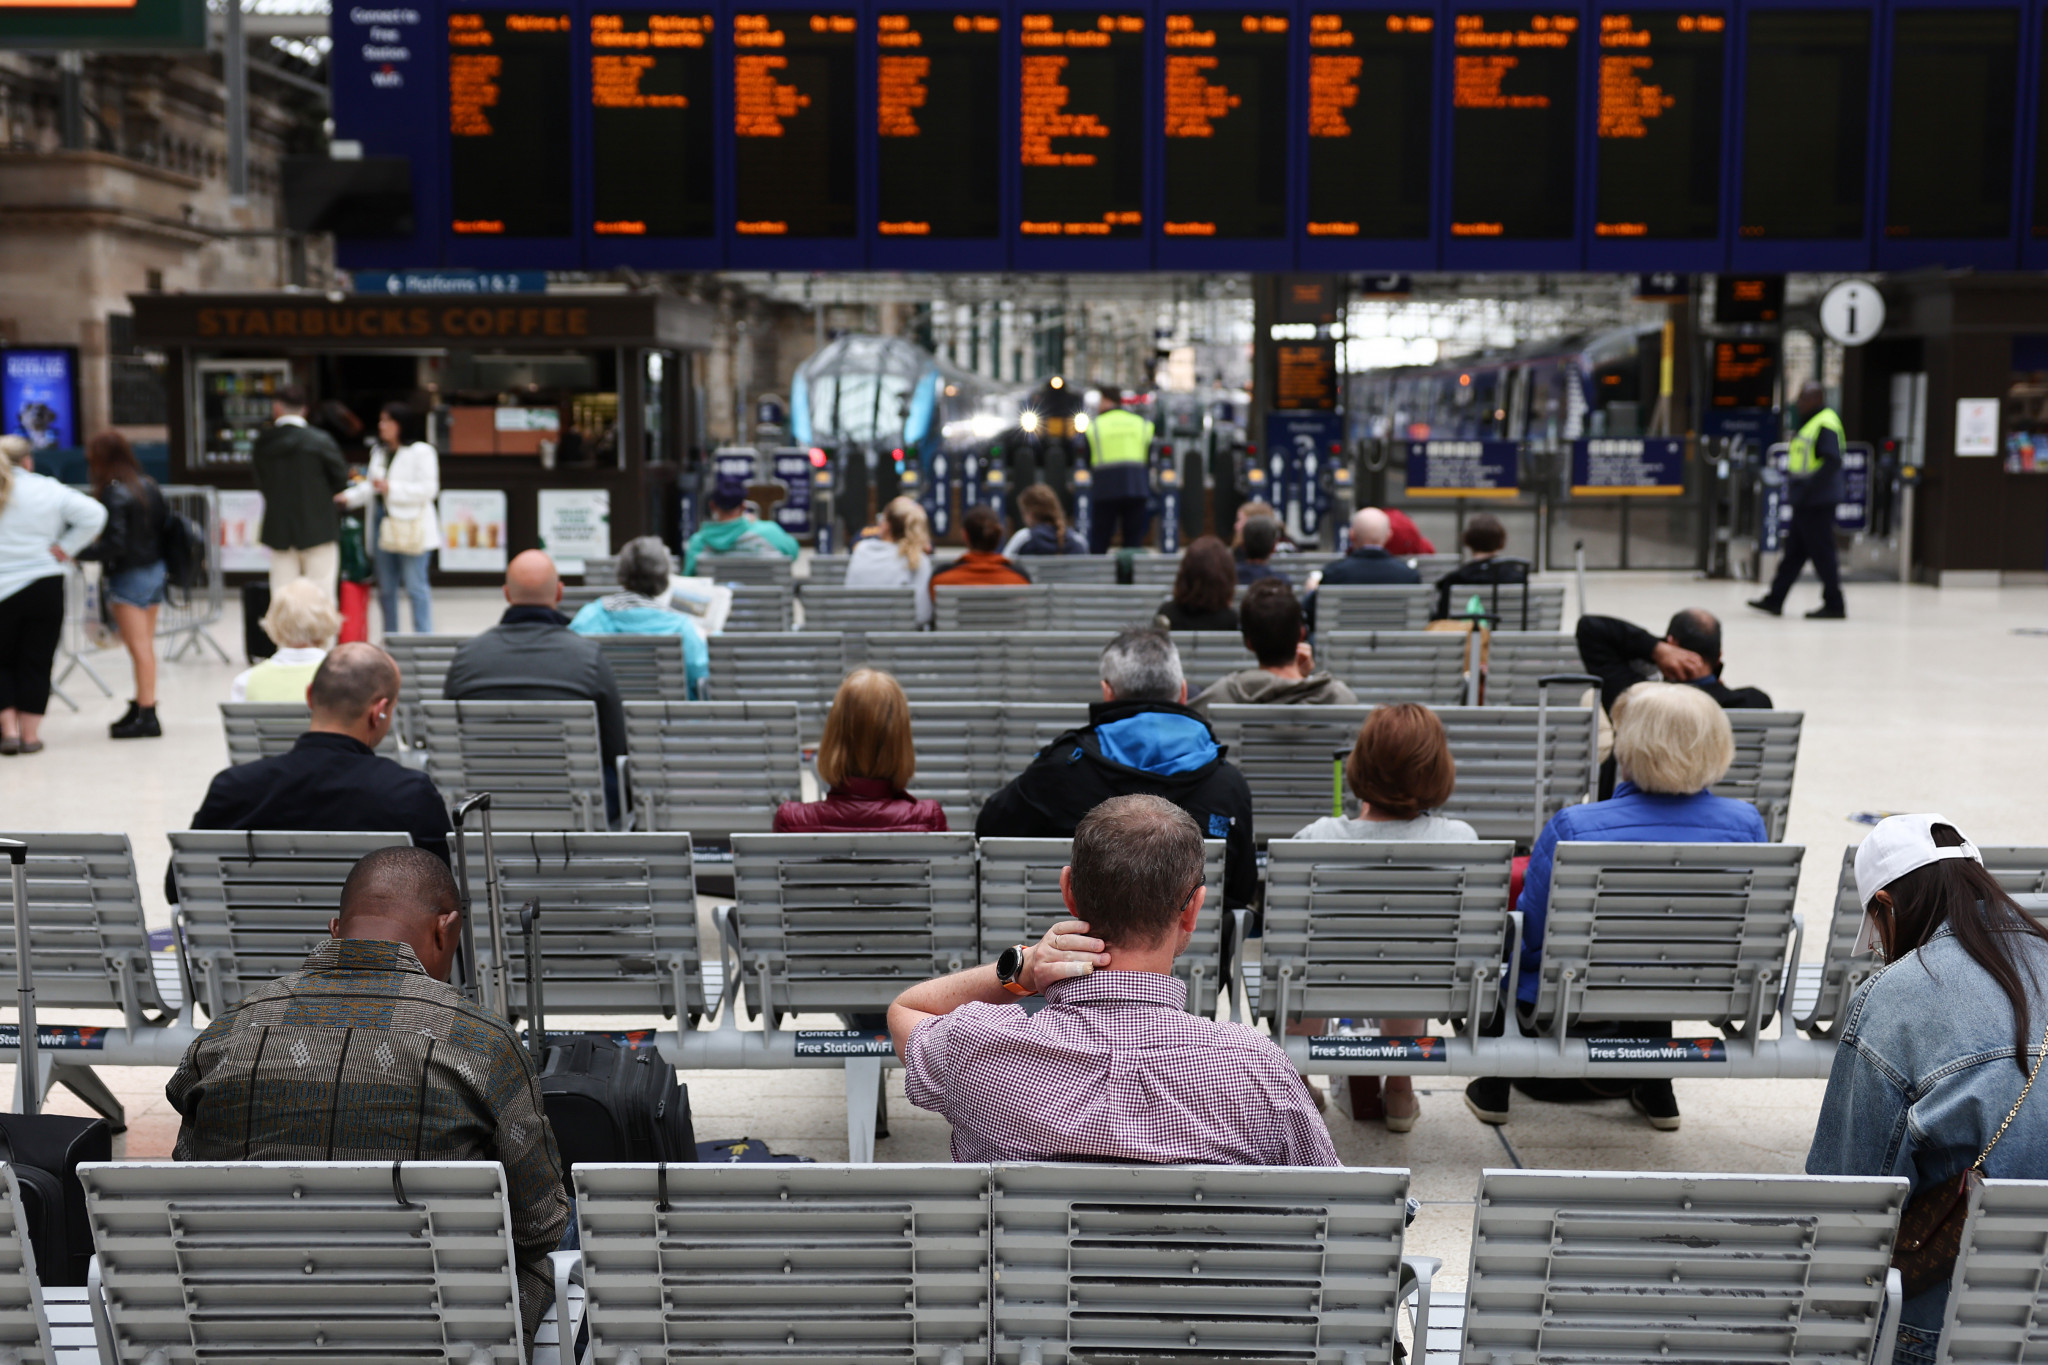 Train drivers set to go on strike during Commonwealth Games